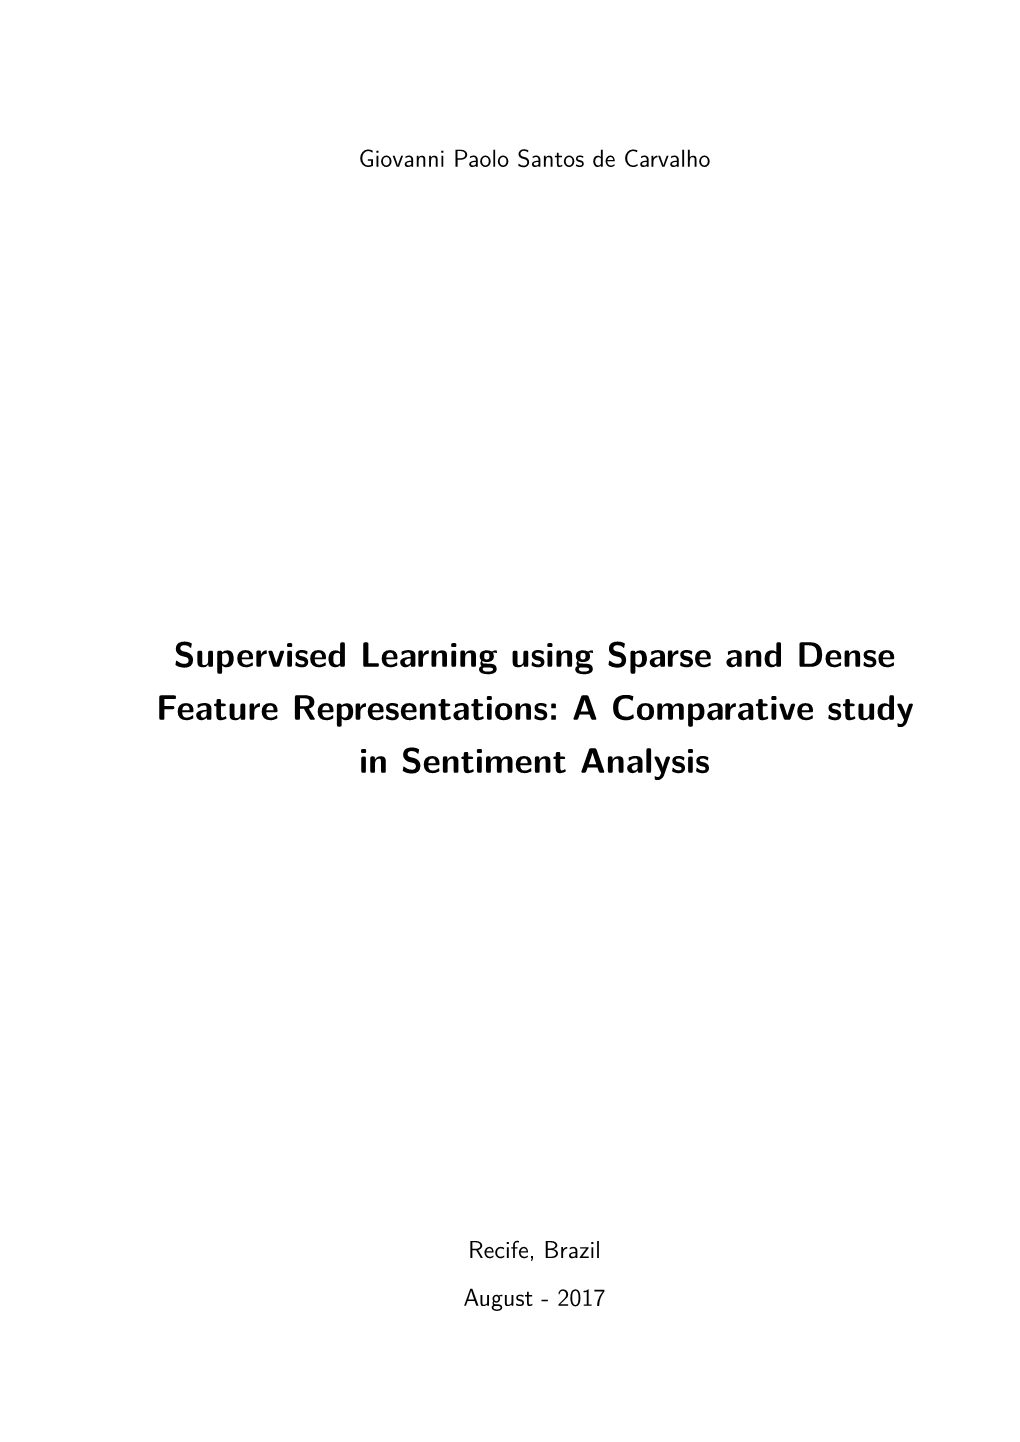 Supervised Learning Using Sparse and Dense Feature Representations: a Comparative Study in Sentiment Analysis